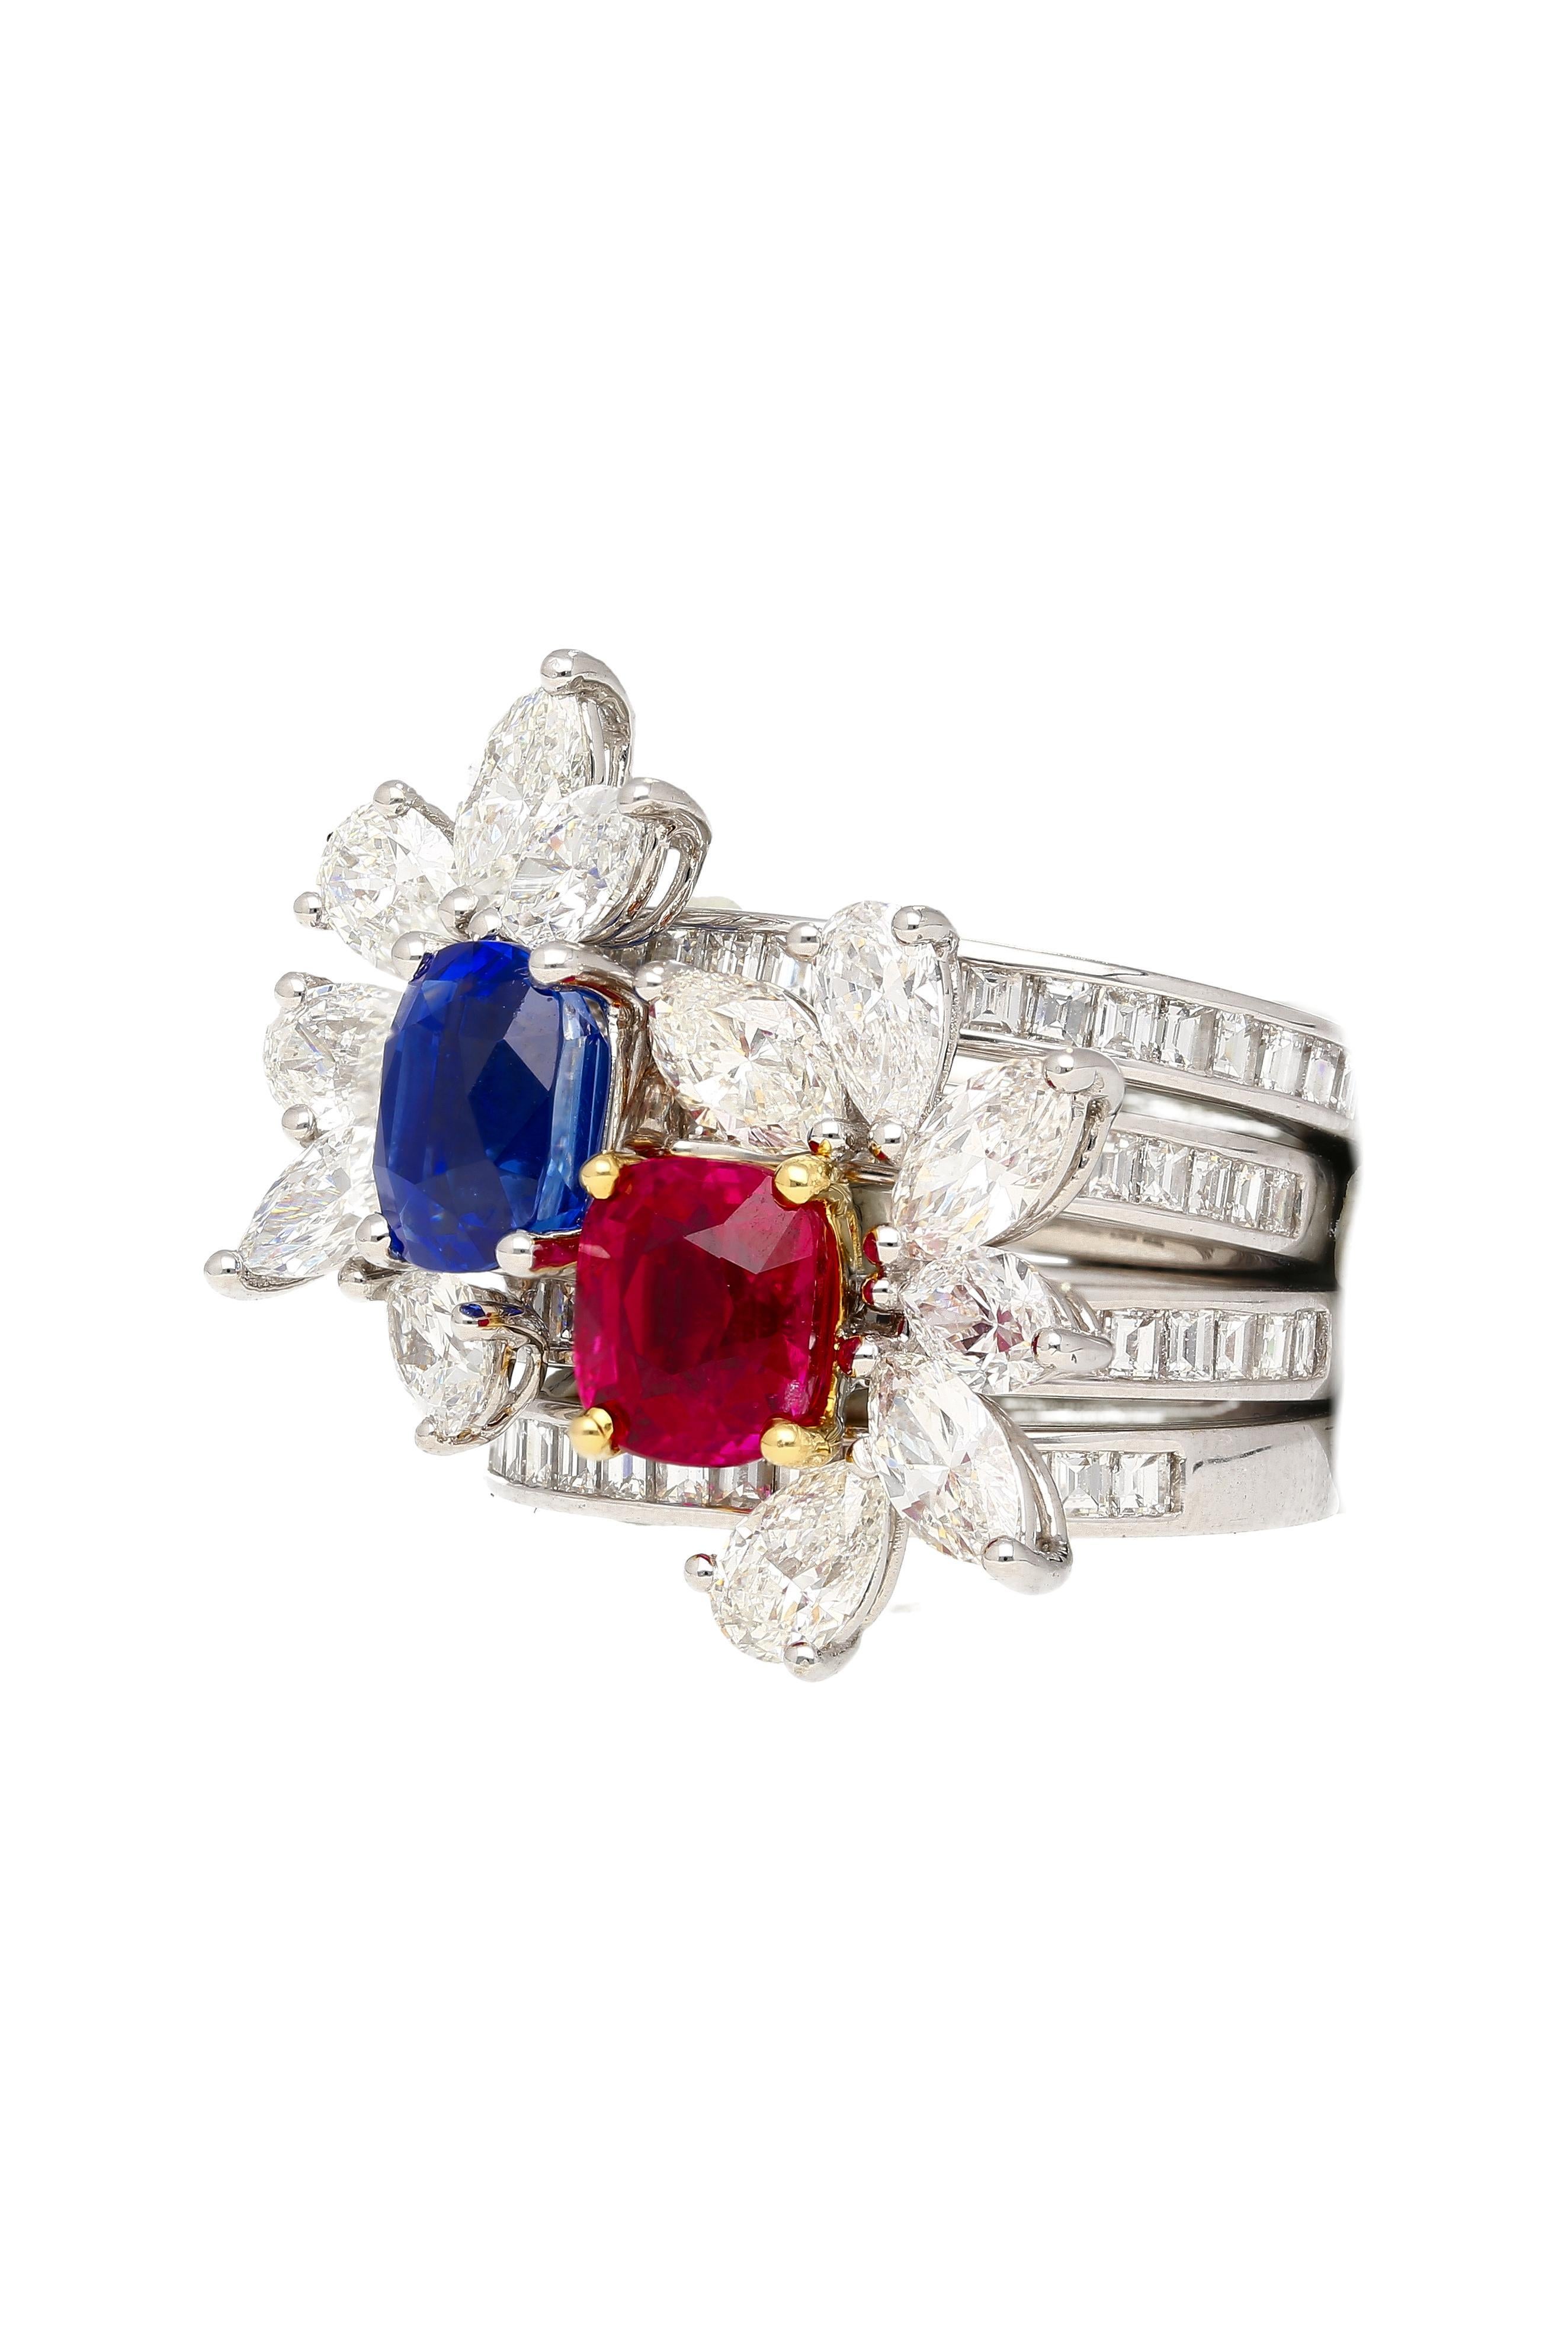 A ring that comes around once in a lifetime. Set with the some of finest gemstones in the world with legendary origins. The focus, an unheated Kashmir Sapphire and Burma Ruby. Both bearing superb color, clarity, transparency, and luster. Both of